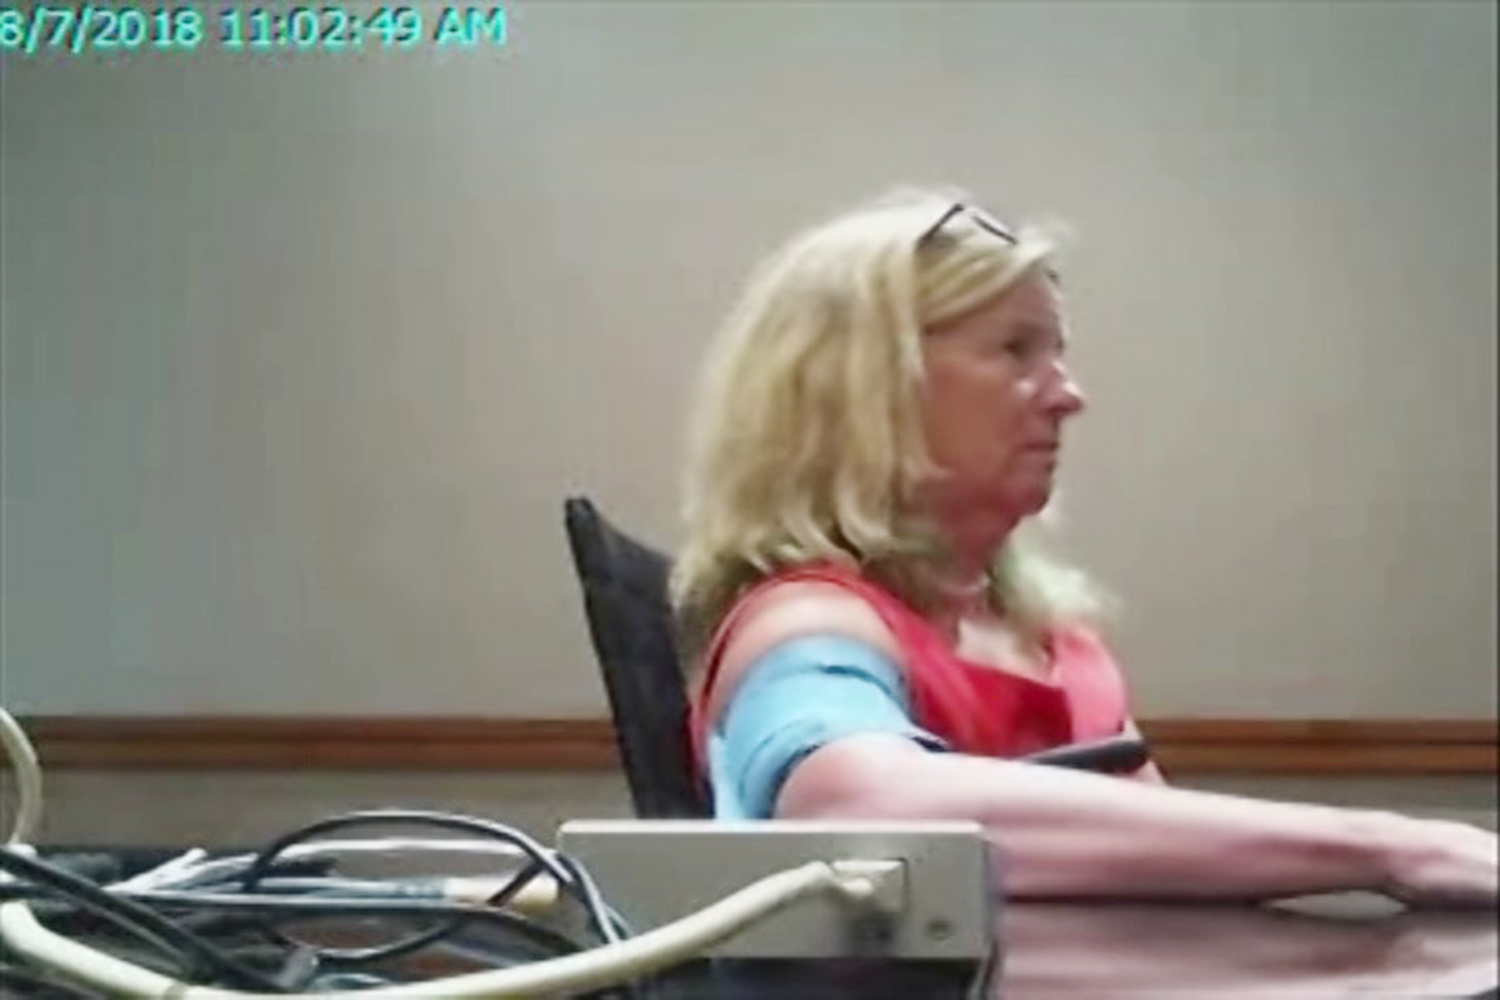 PHOTO: Christine Blasey Ford undergoes a polygraph examination on Aug. 7, 2018, in a photo provided by her legal team.